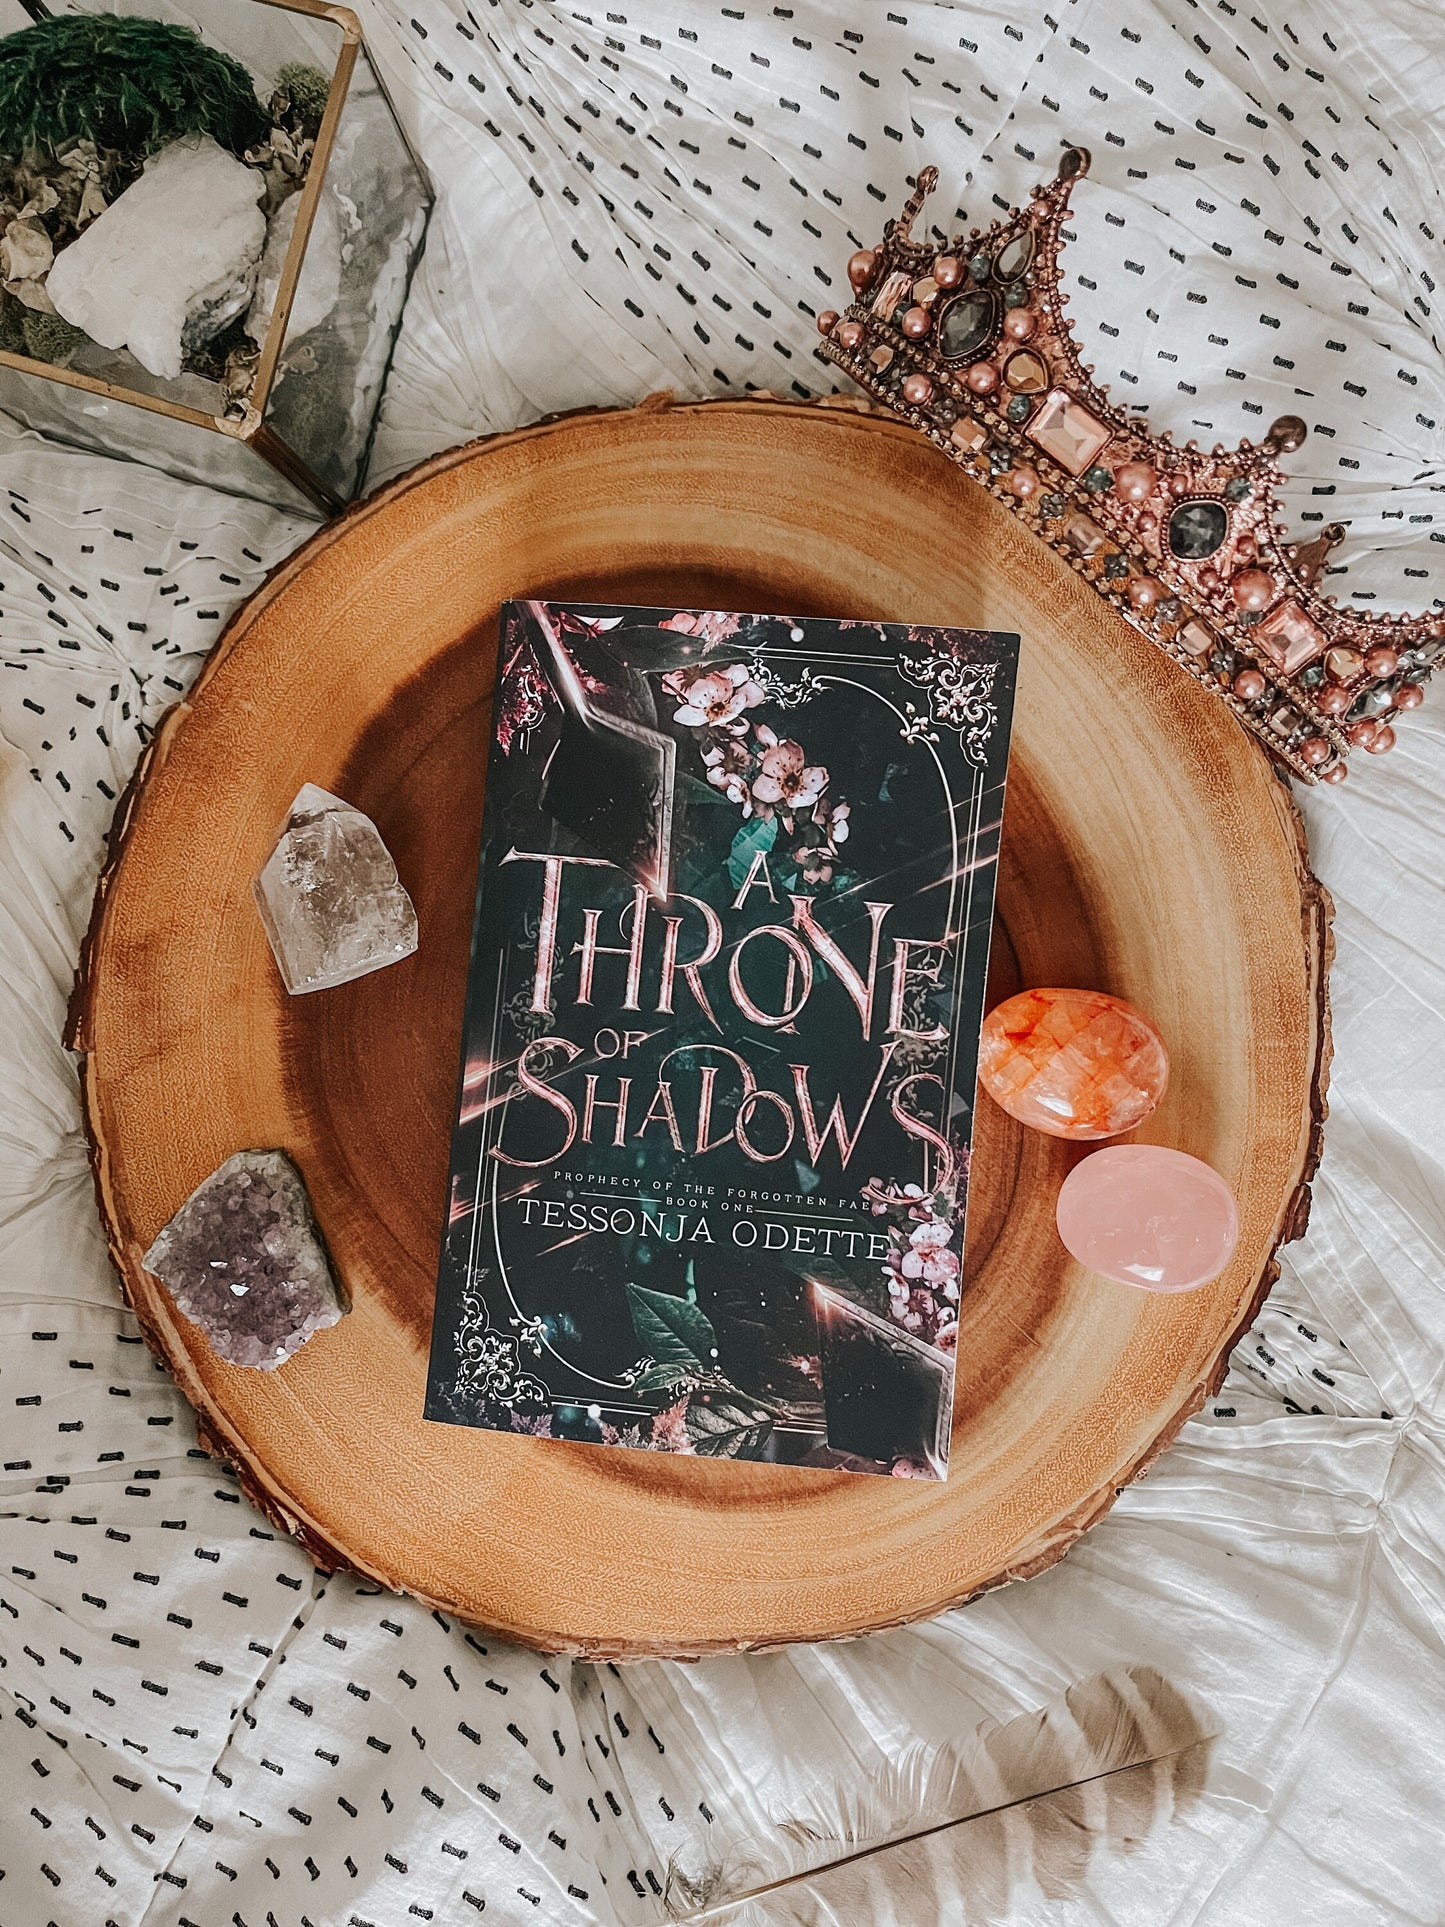 A Throne of Shadows (paperback) signed